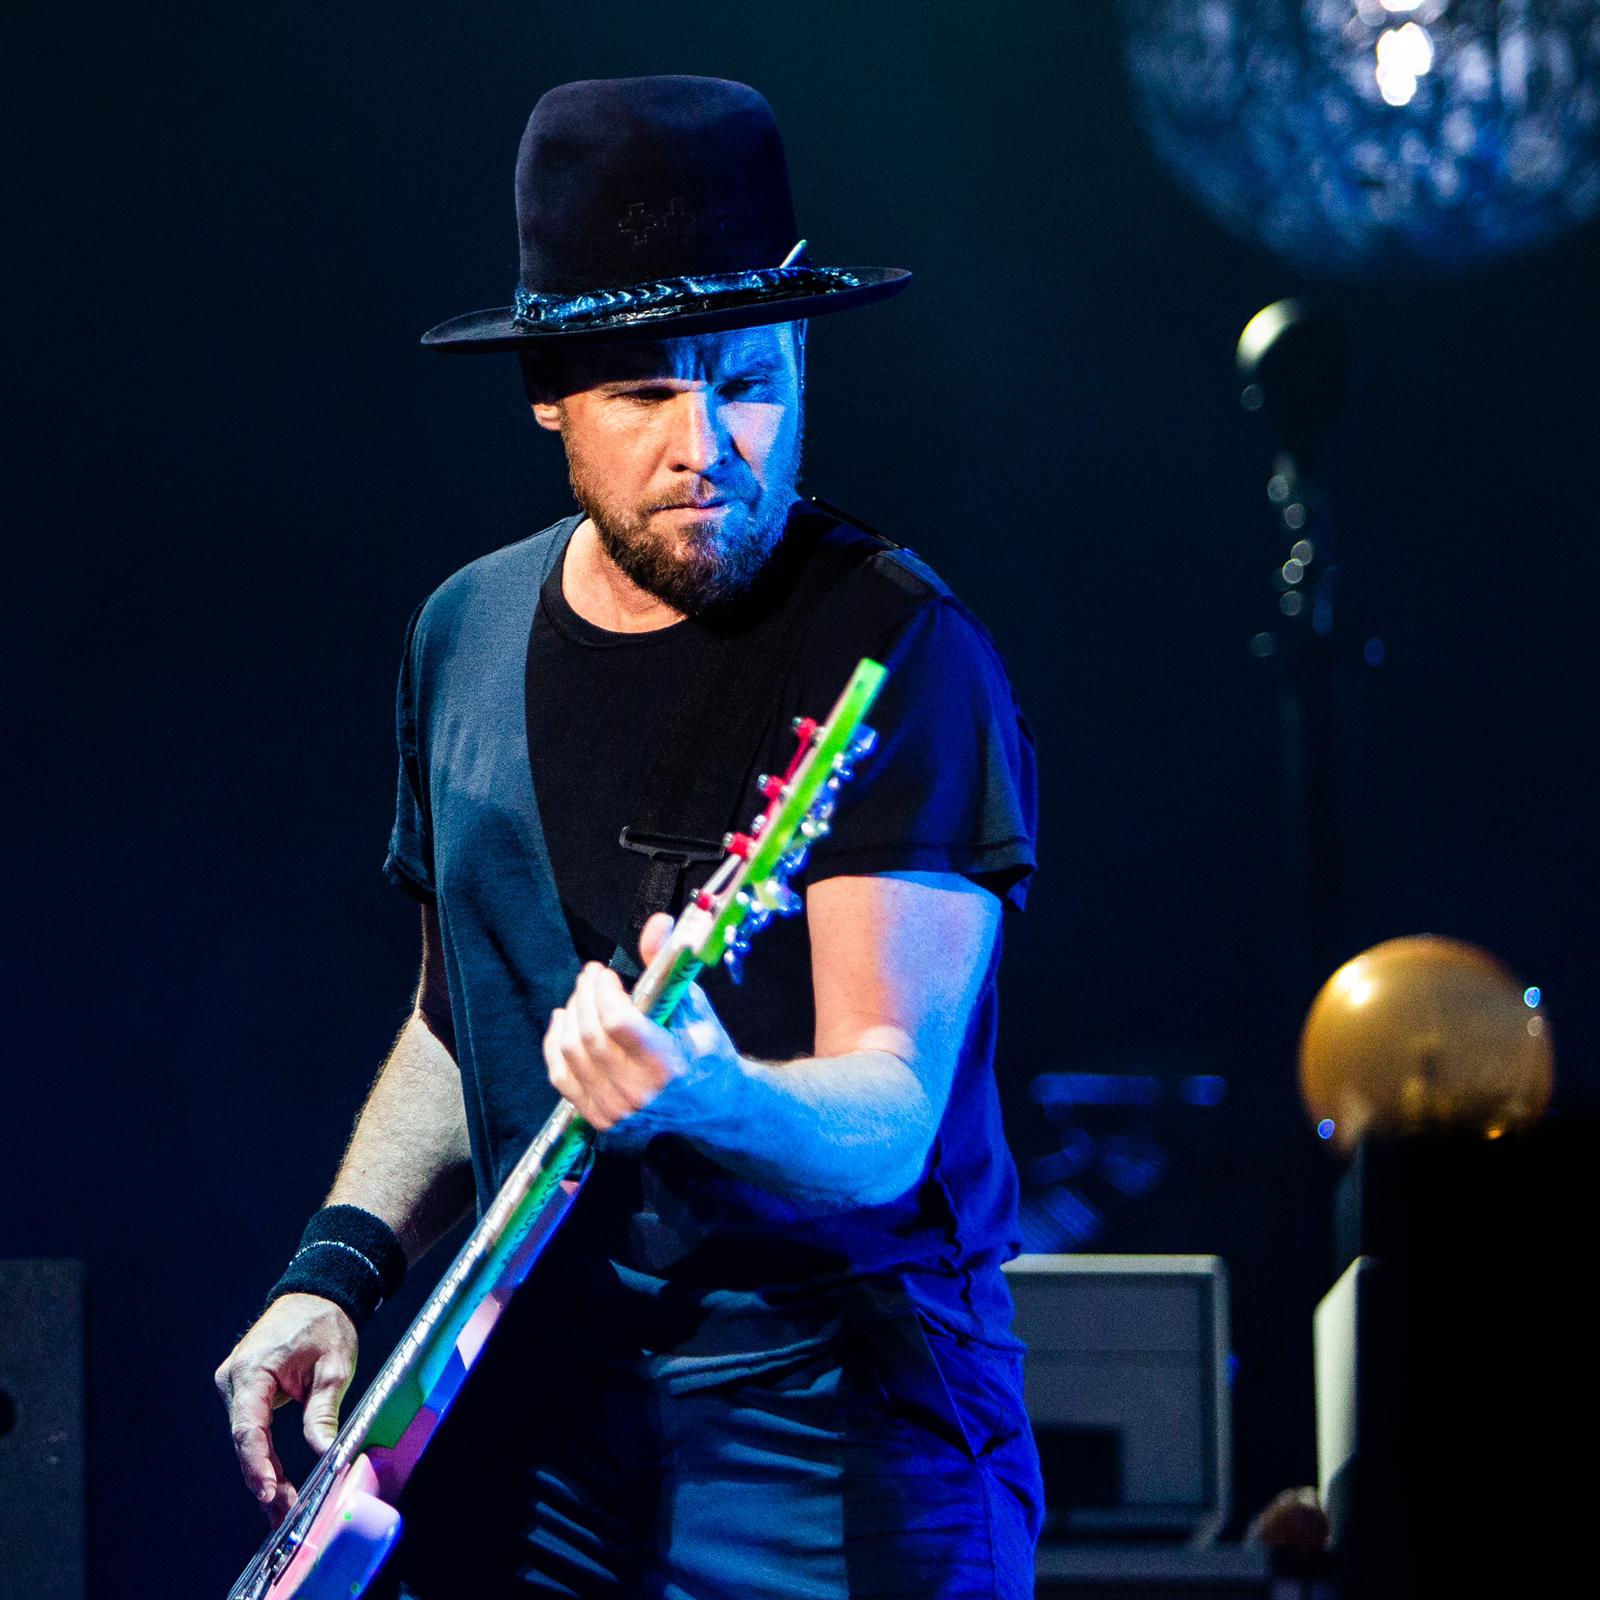 Jeff Ament and Stone Gossard talks about Dance Of The Clairvoyants